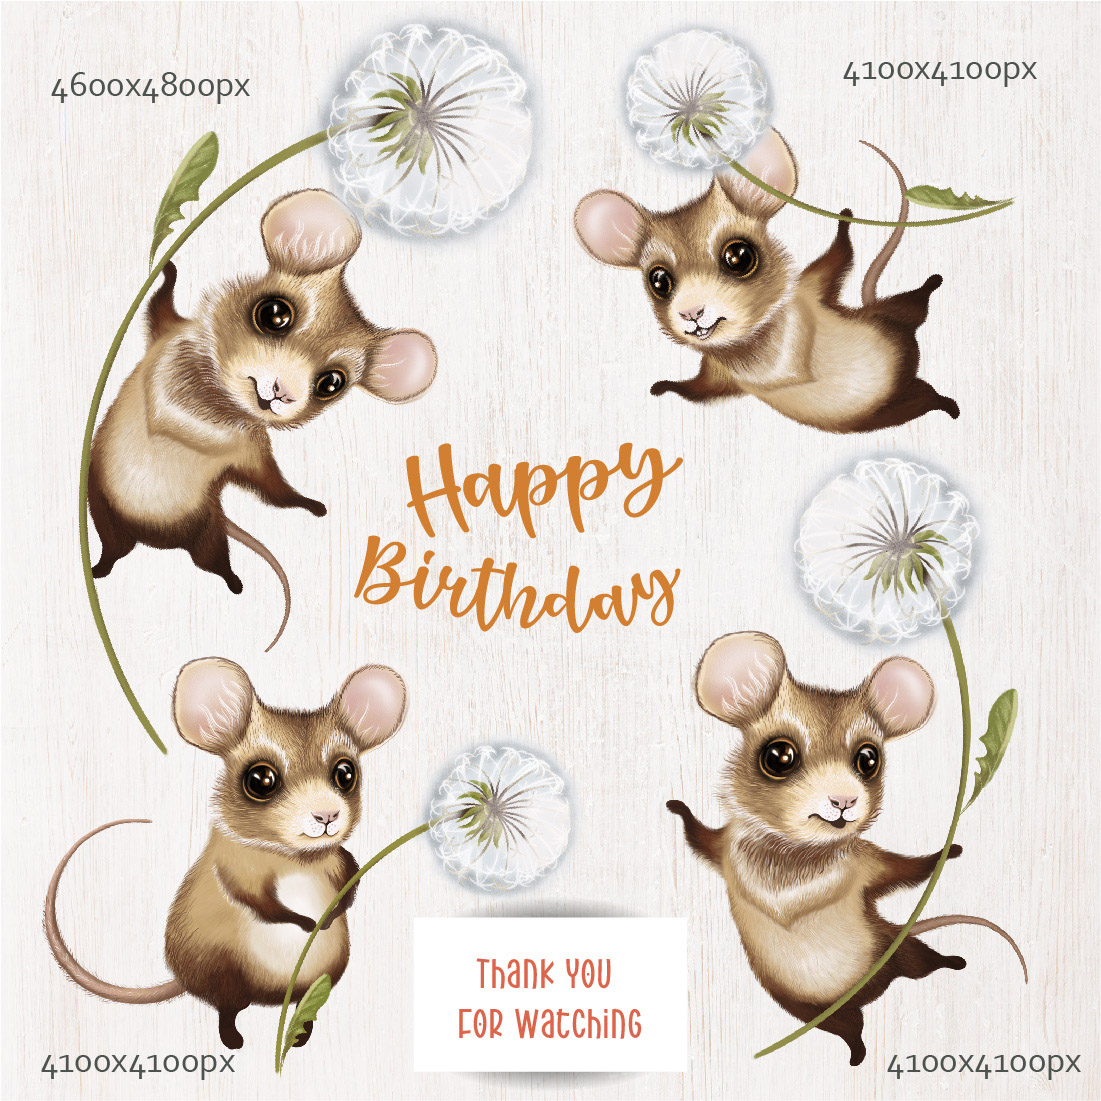 Cute Cartoon Little Mouse with Flowers examples.